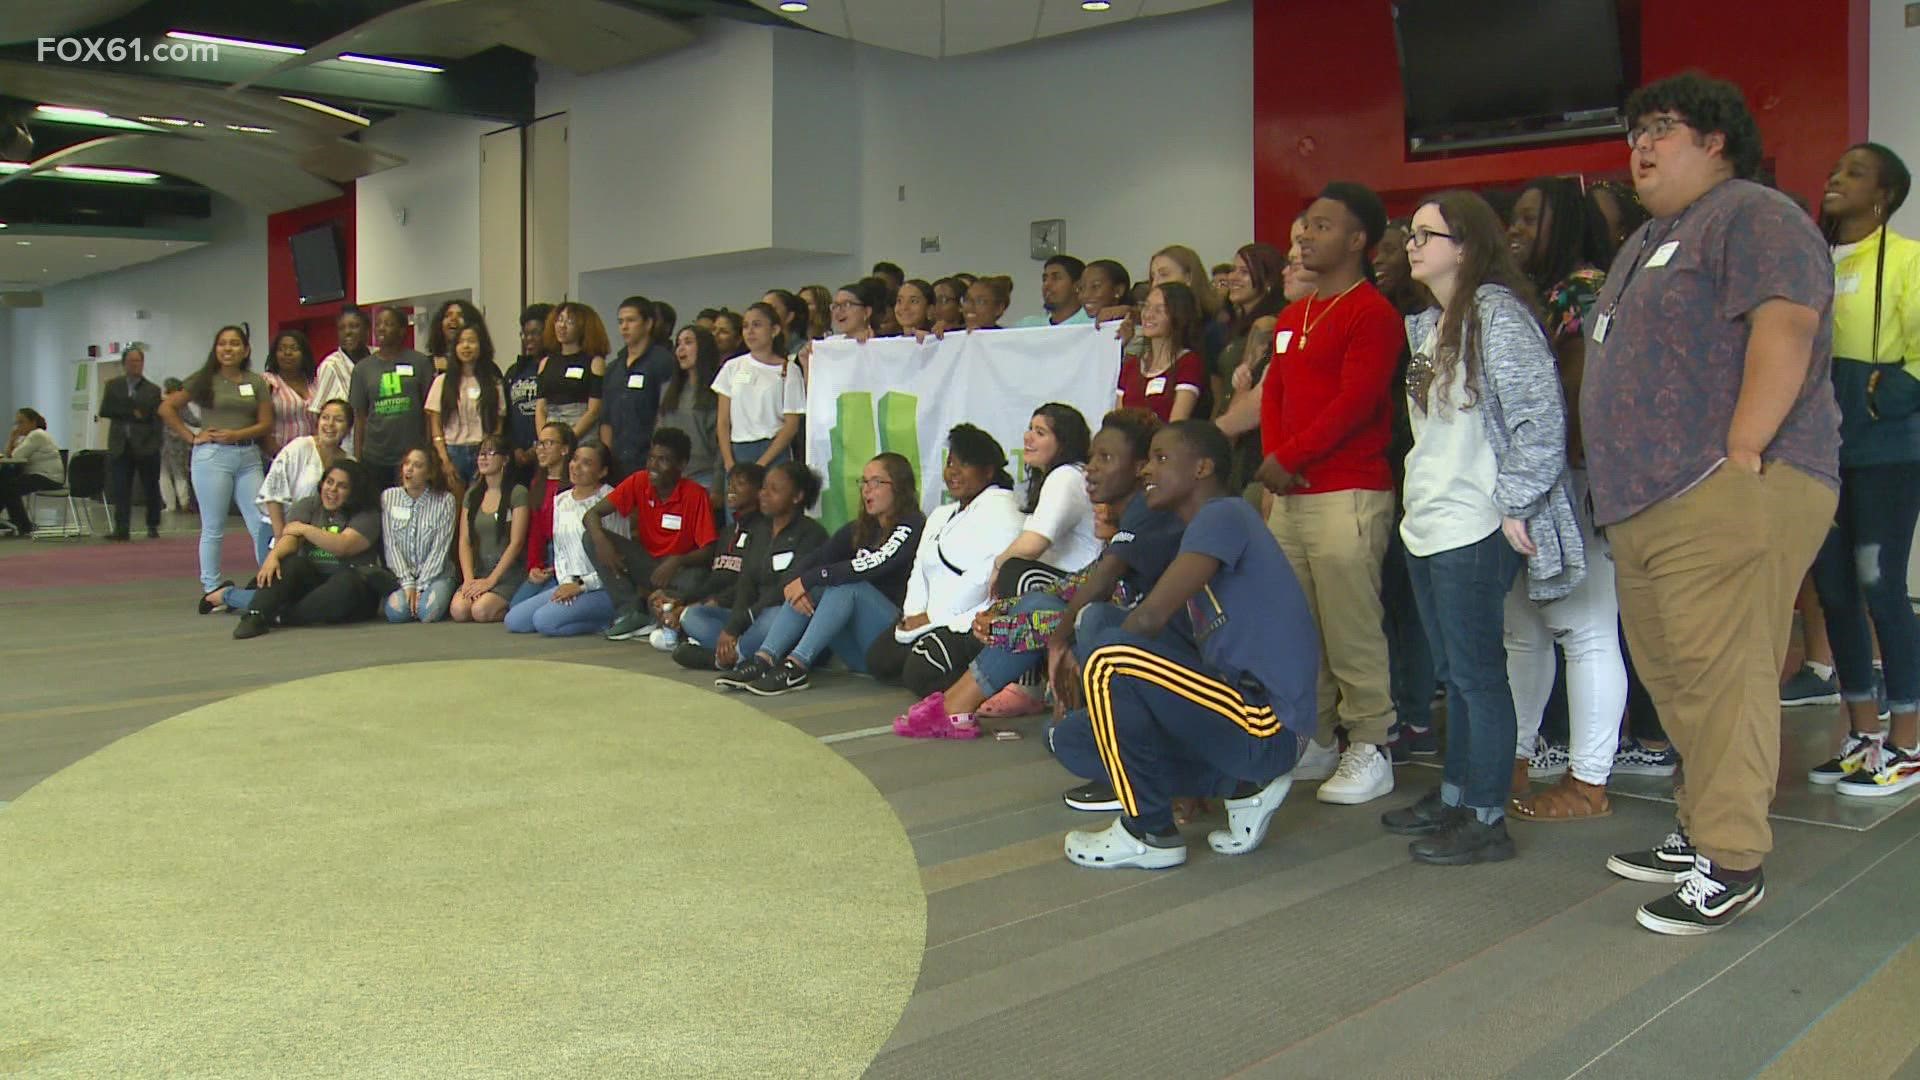 The program has given over 800 scholarships for Hartford students heading to college over the last six years.